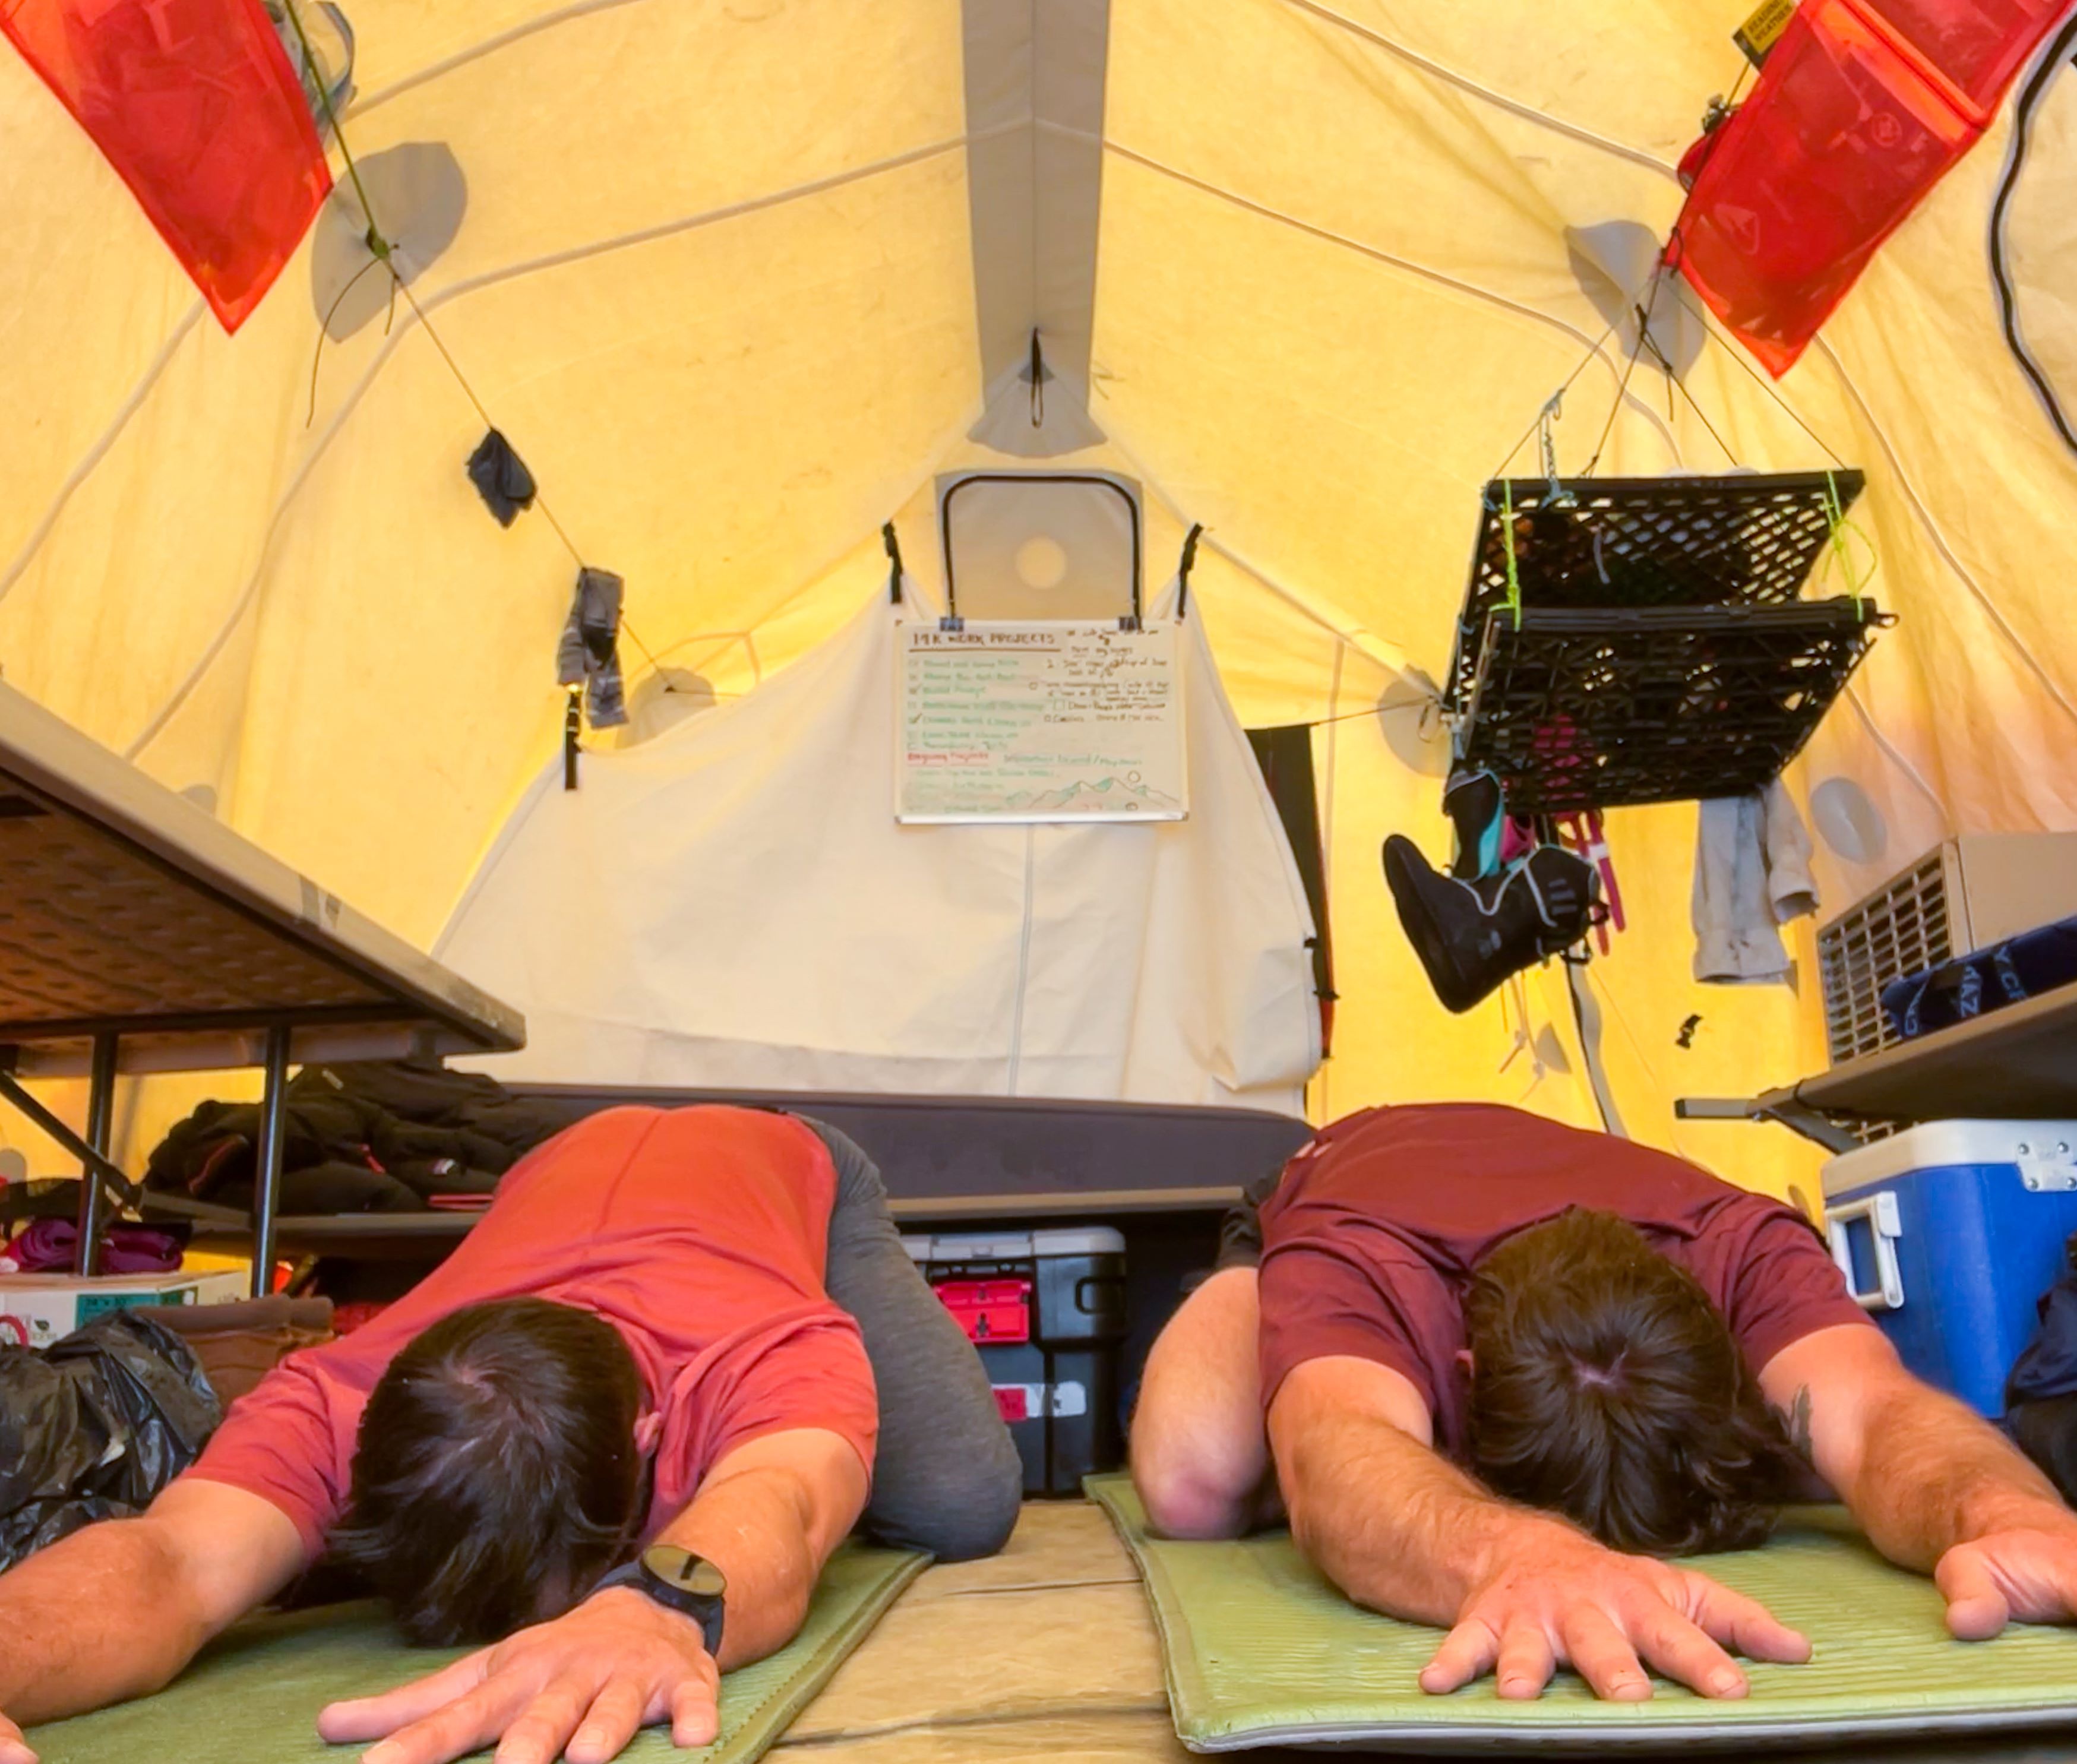 Two men do a yoga stretch on the floor of a yellow tent.